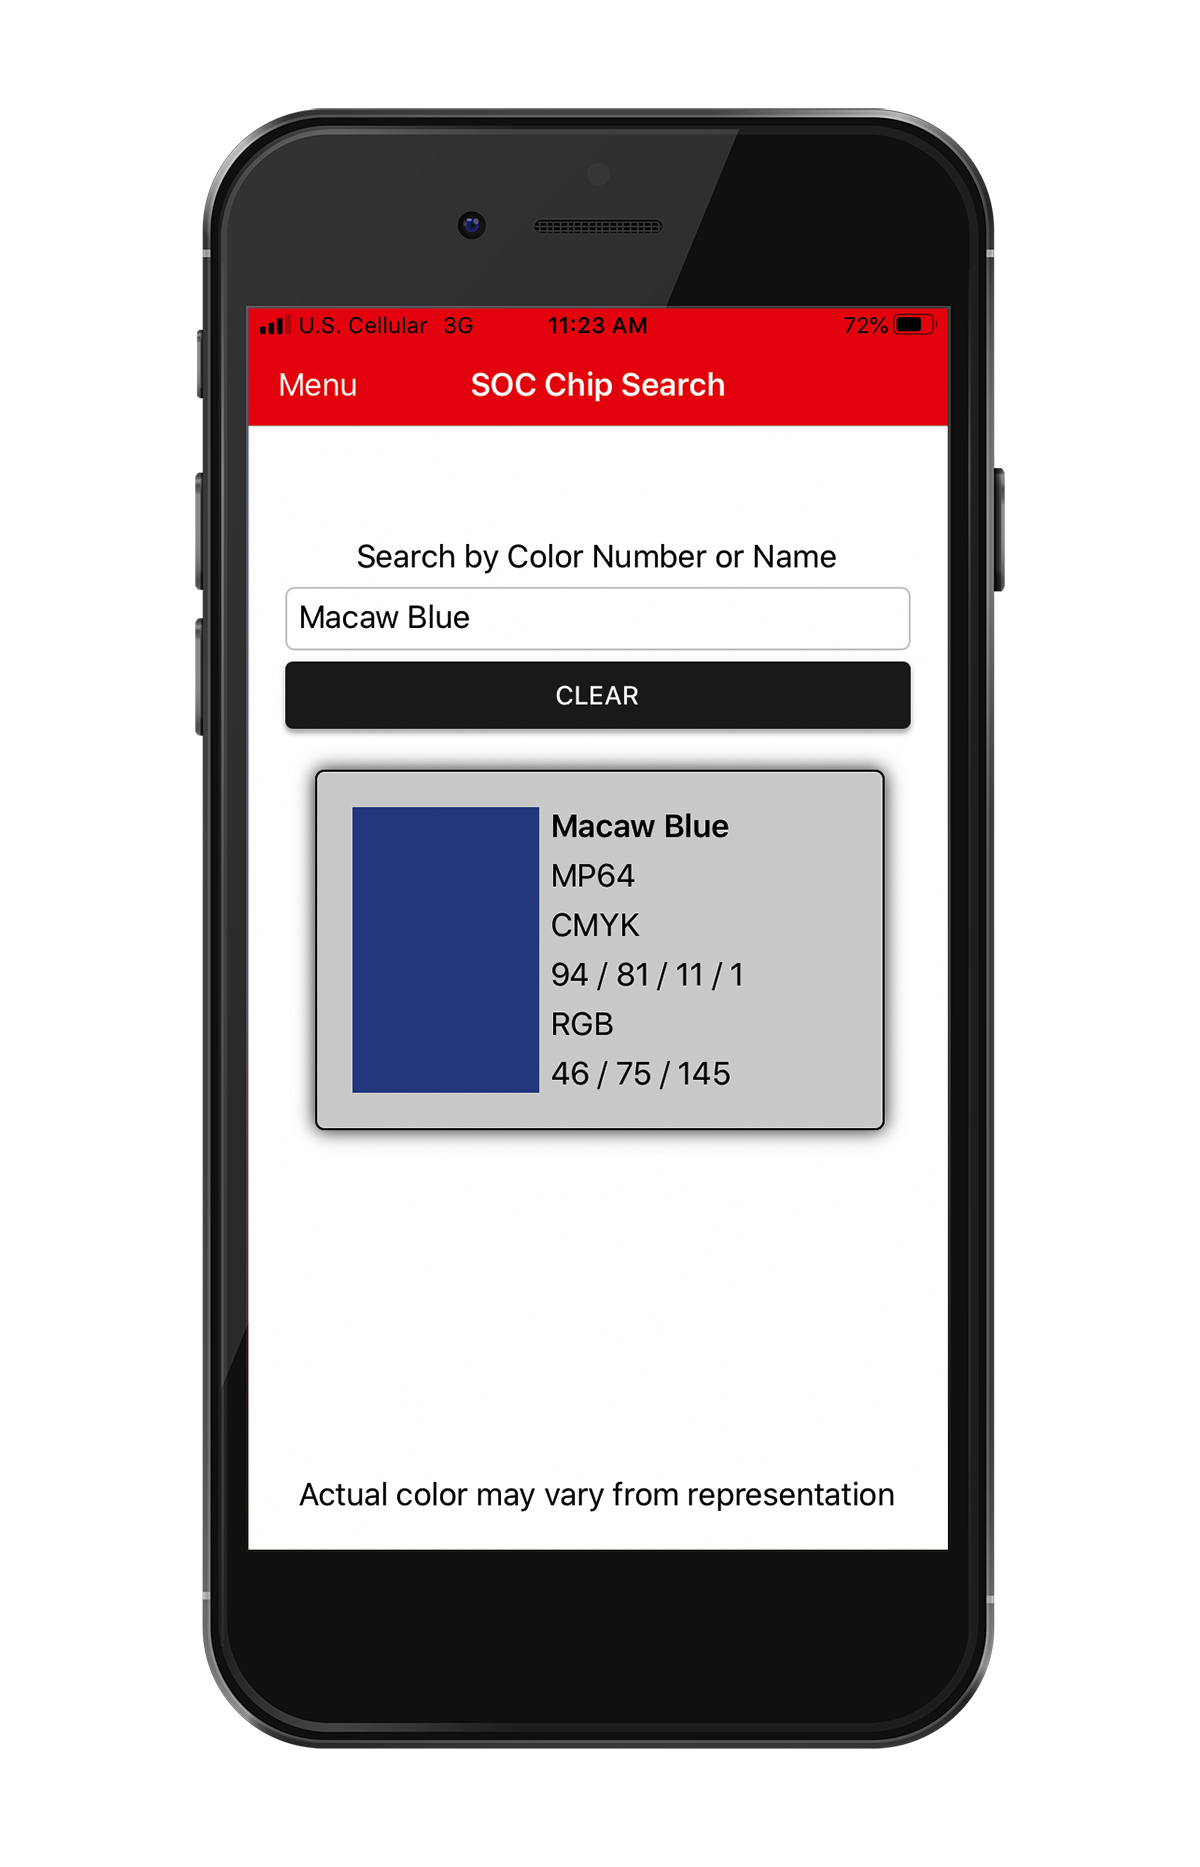 SOC Chip Search: View the color and get CMYK/RGB values